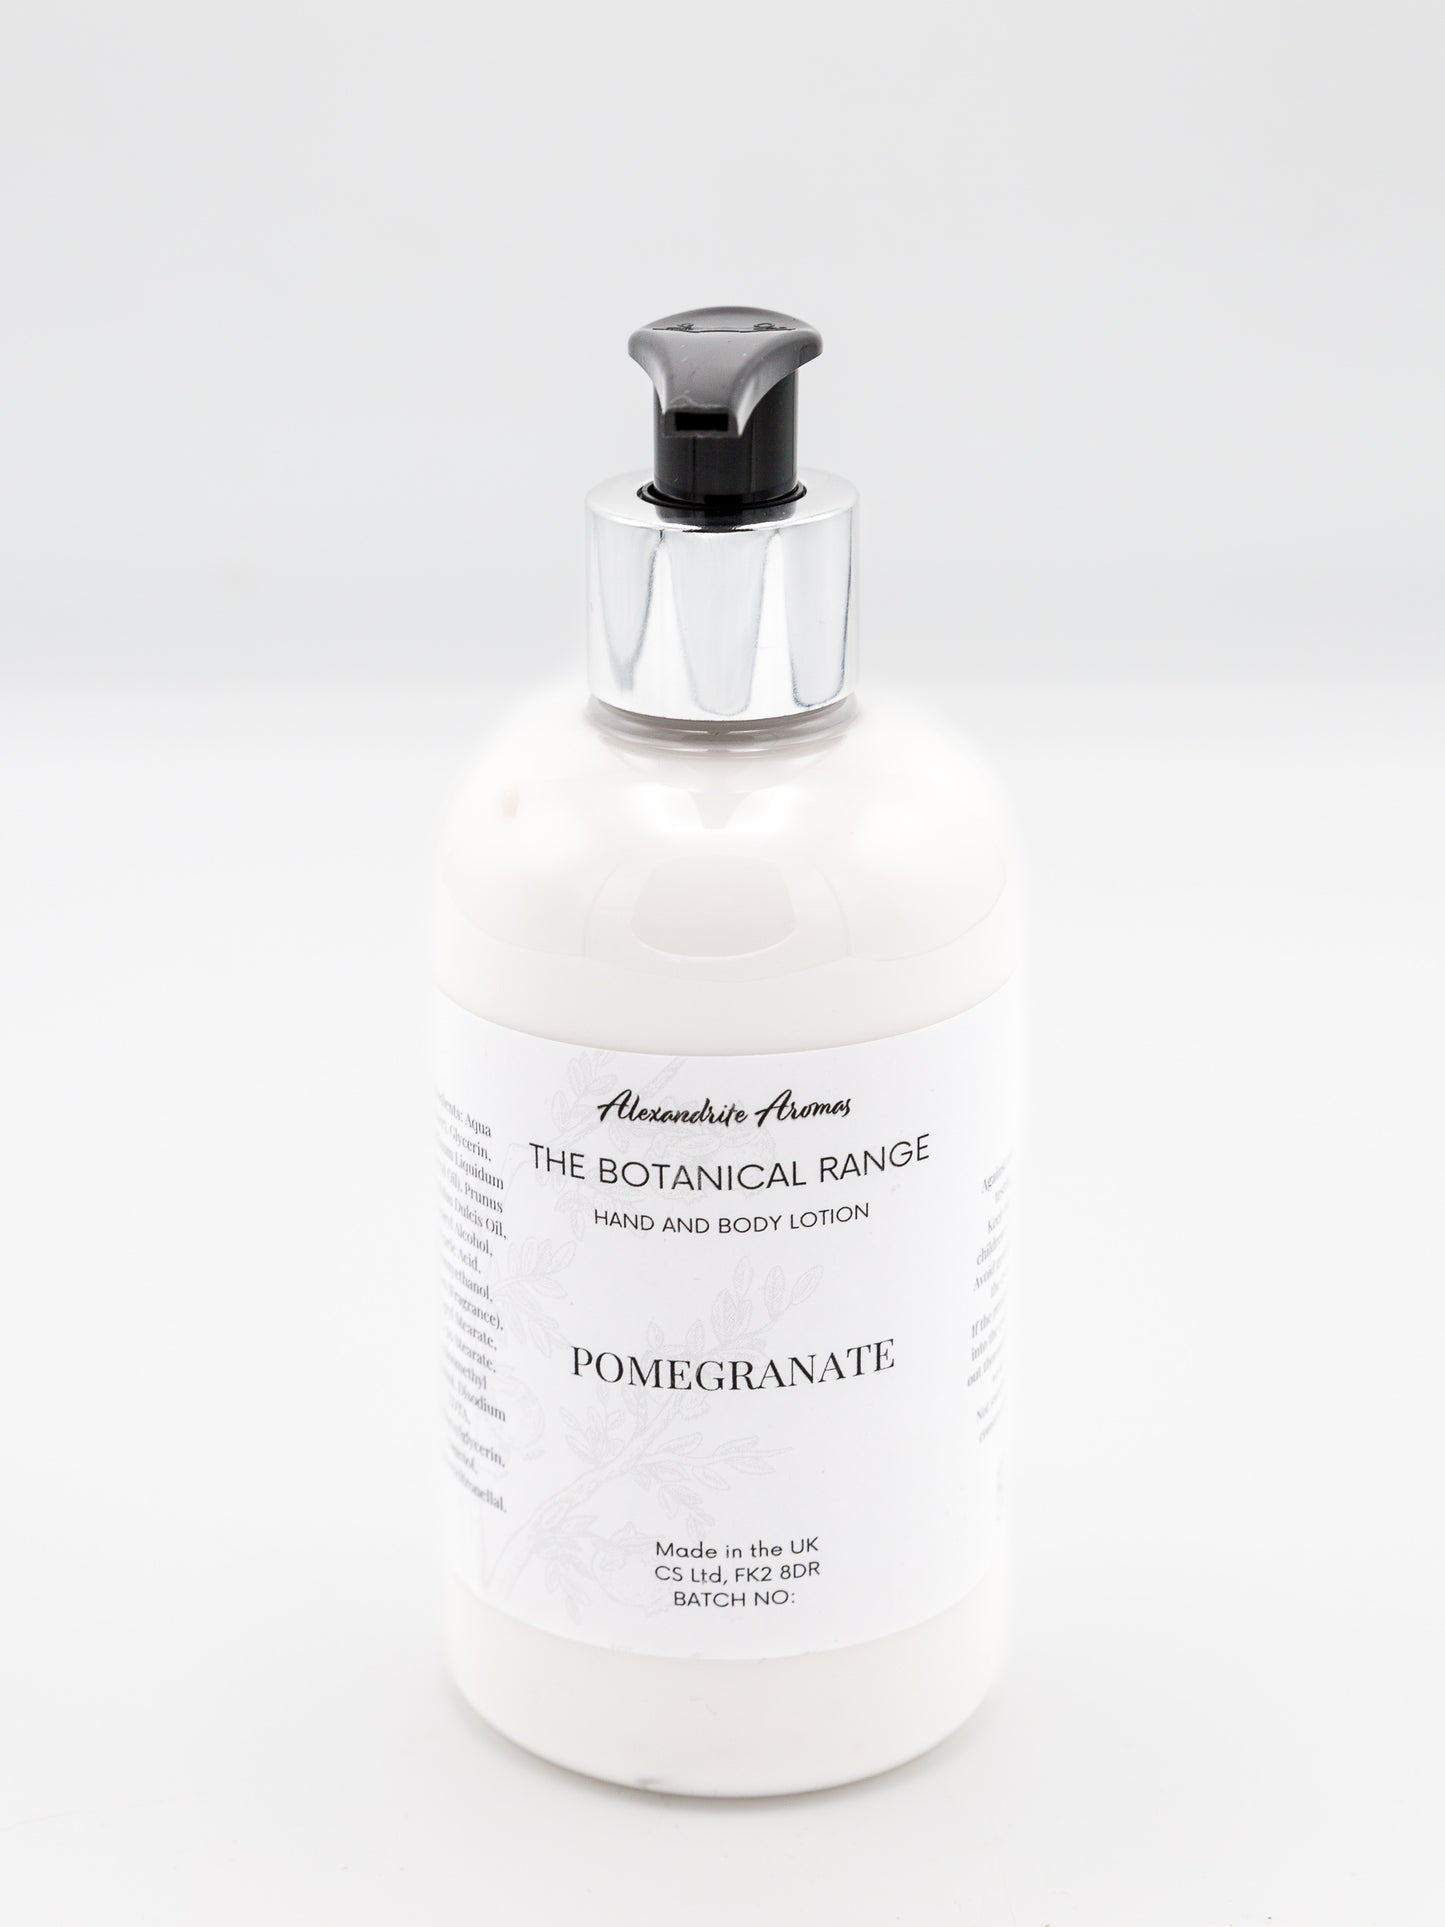 Pomegranate - Hand and Body Lotion